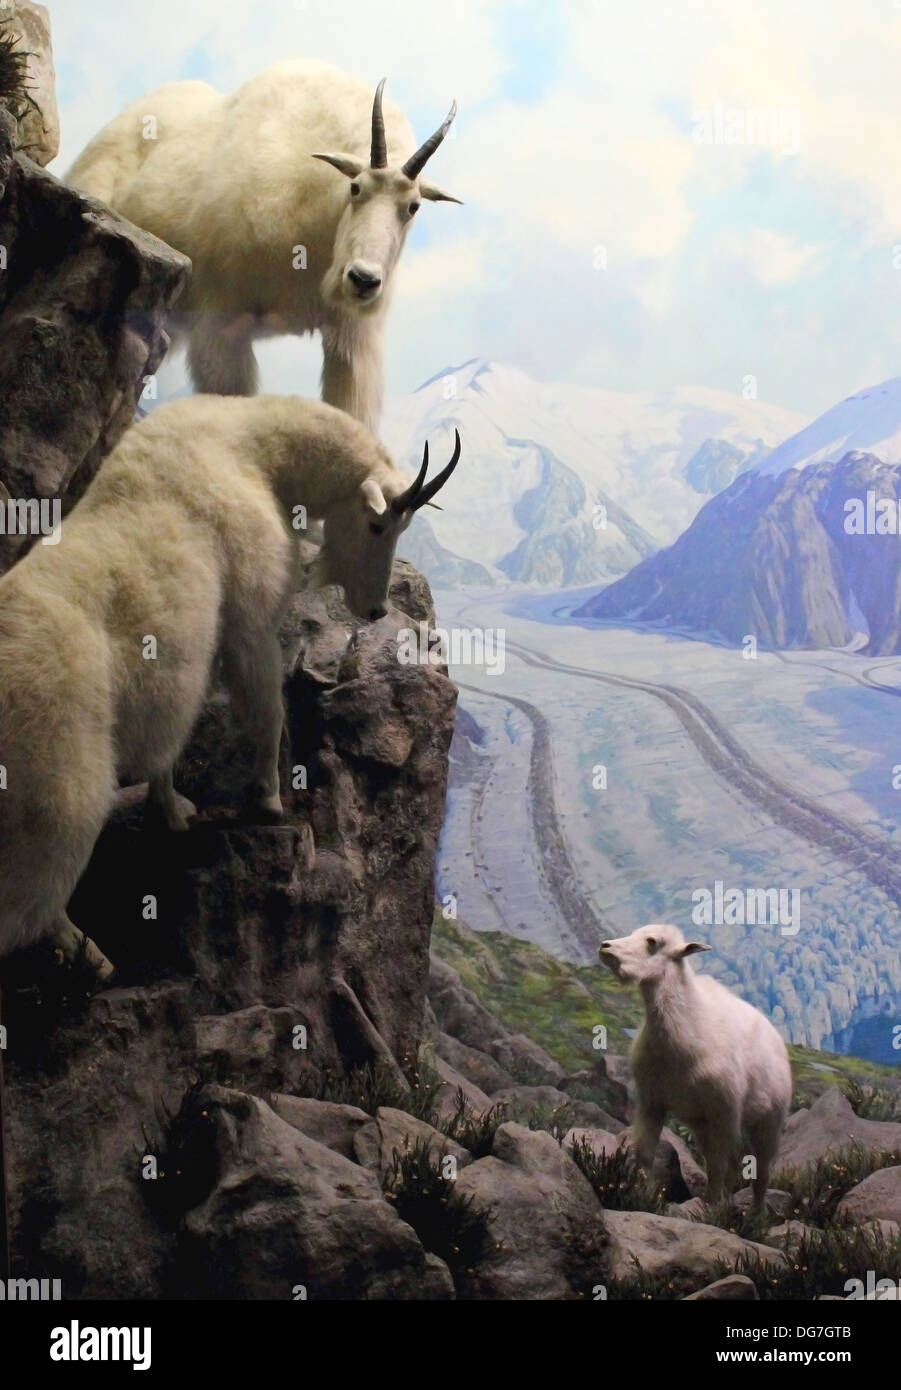 A diorama of Mountain Goats displayed at the American Museum of Natural History in New York City. Stock Photo